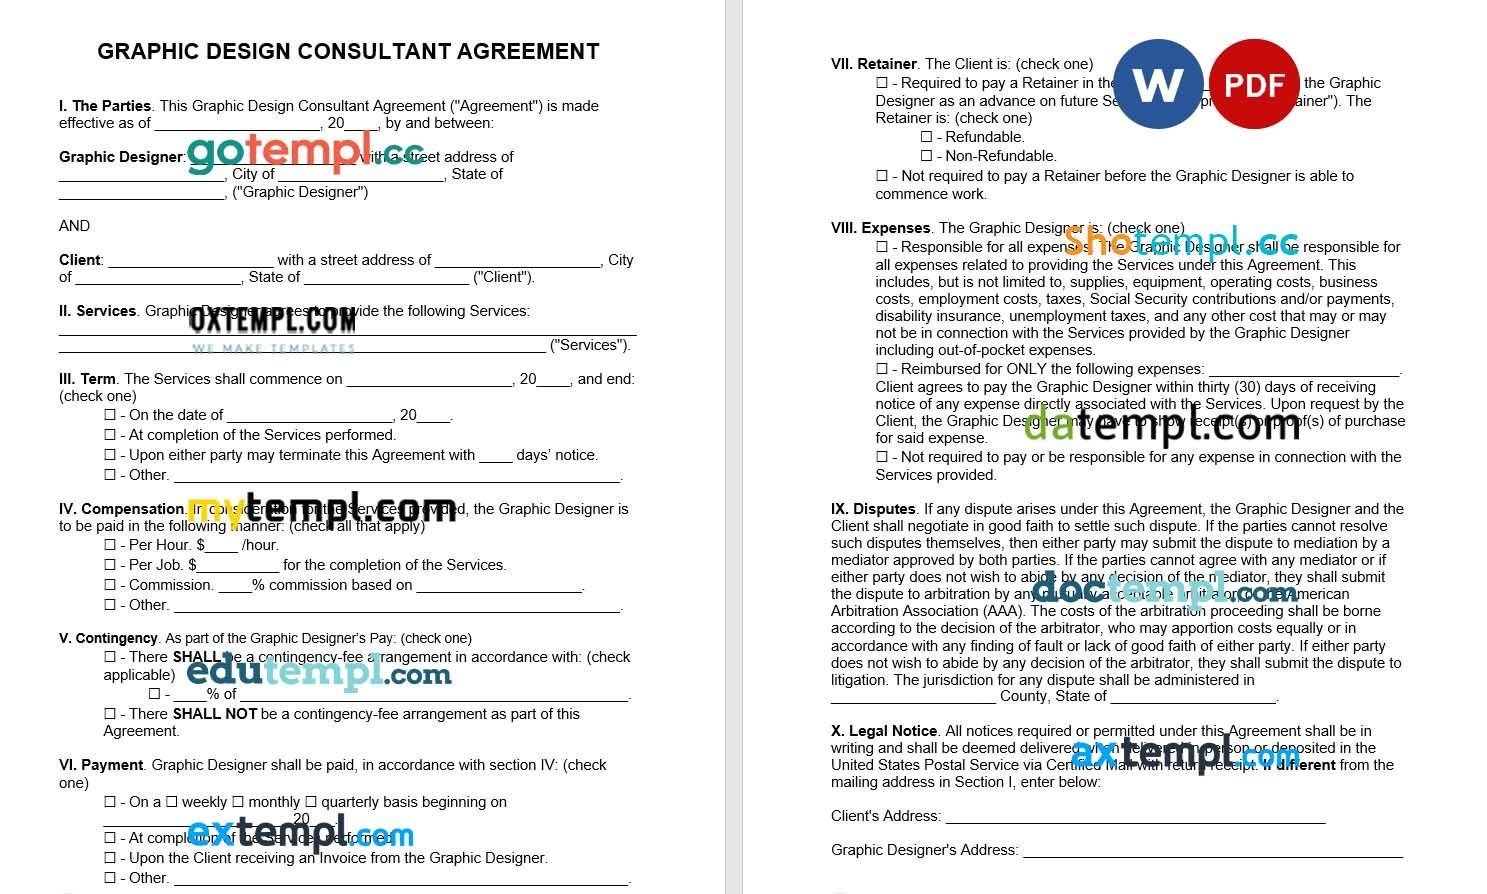 Graphic Design Consultant Agreement Word example, fully editable